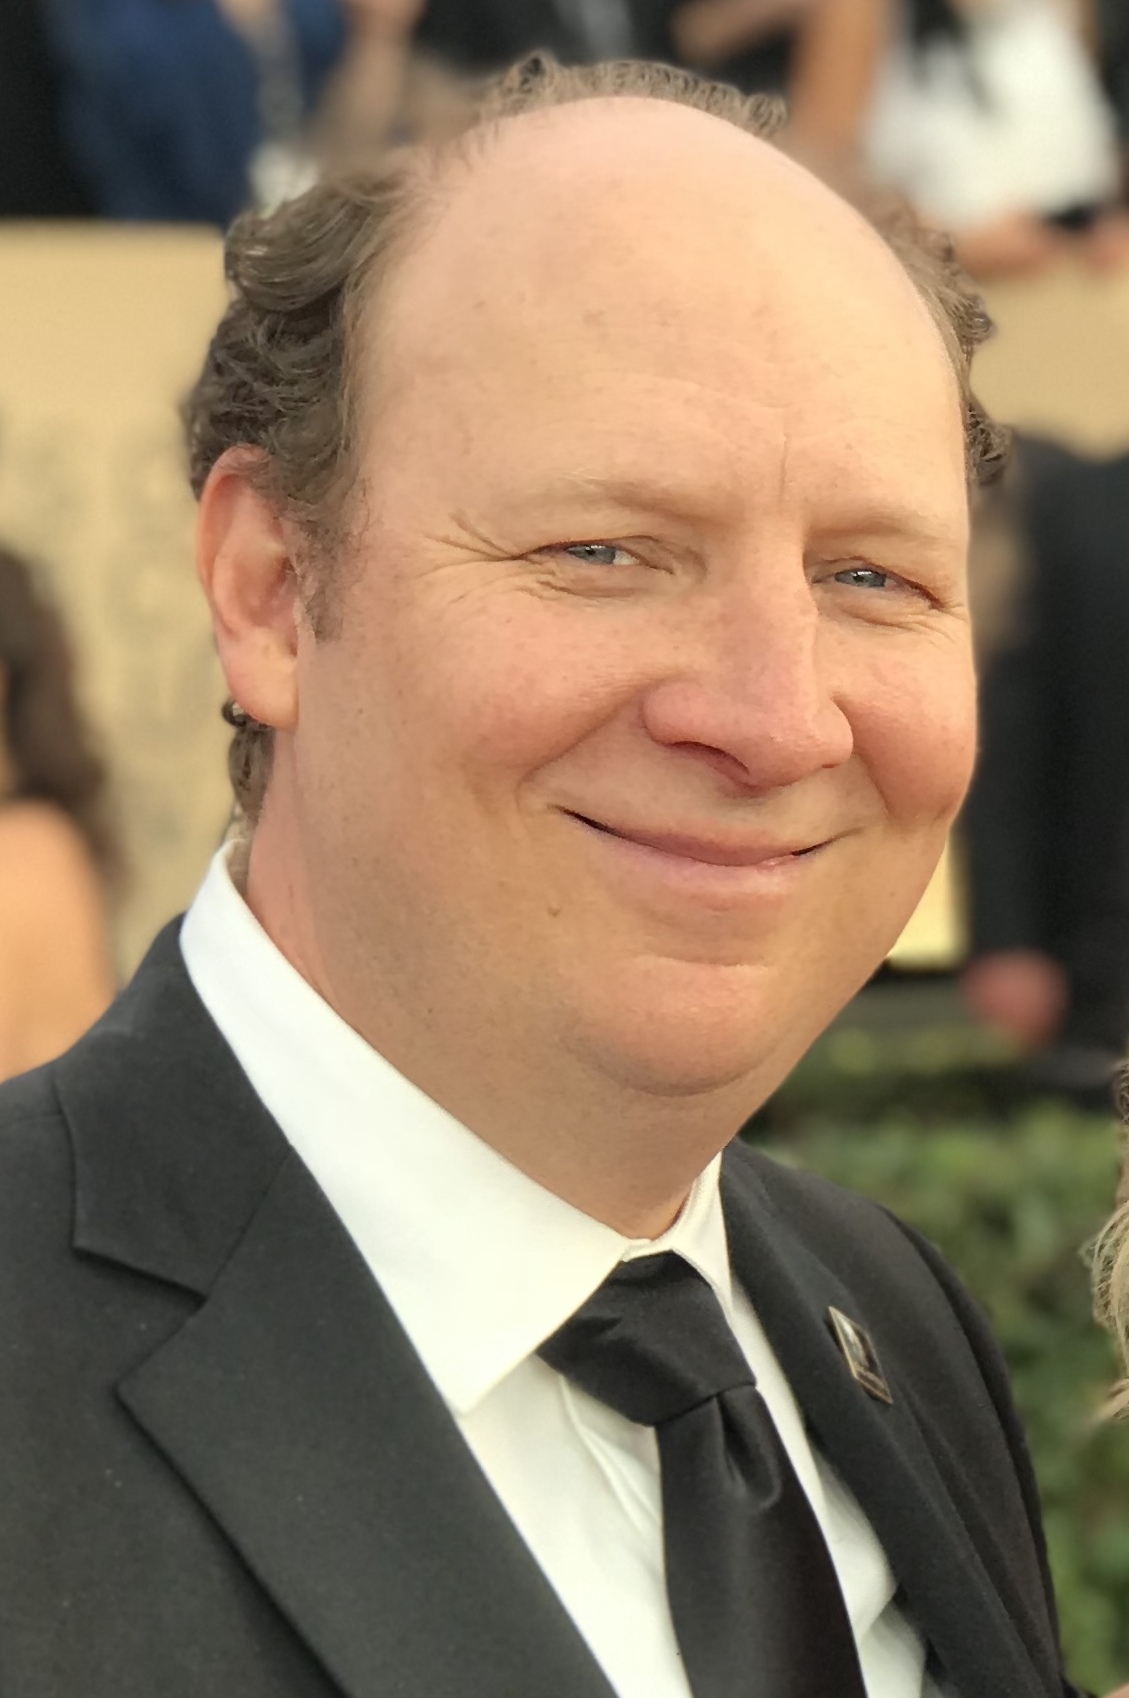 Dan Bakkedahl is an American actor and improvisational comedian. He is best known for starring as Tim Hughes on the CBS sitcom Life in Pieces, as Congressman Roger Furlong on the HBO series Veep, and as Steve Nugent in the FX comedy series Legit.